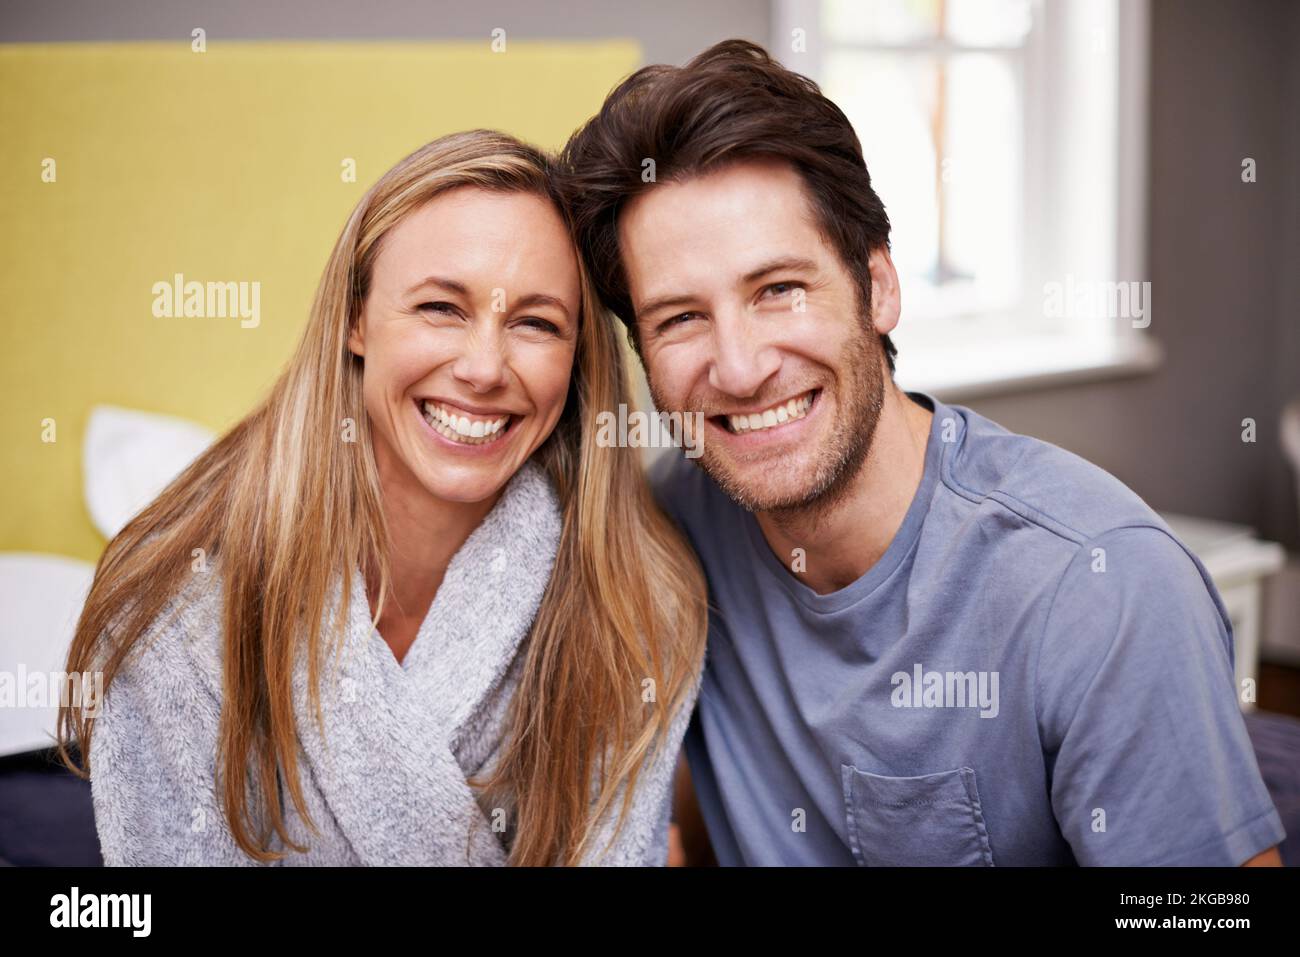 Loving married life. Portrait of a loving middle-aged couple at home. Stock Photo